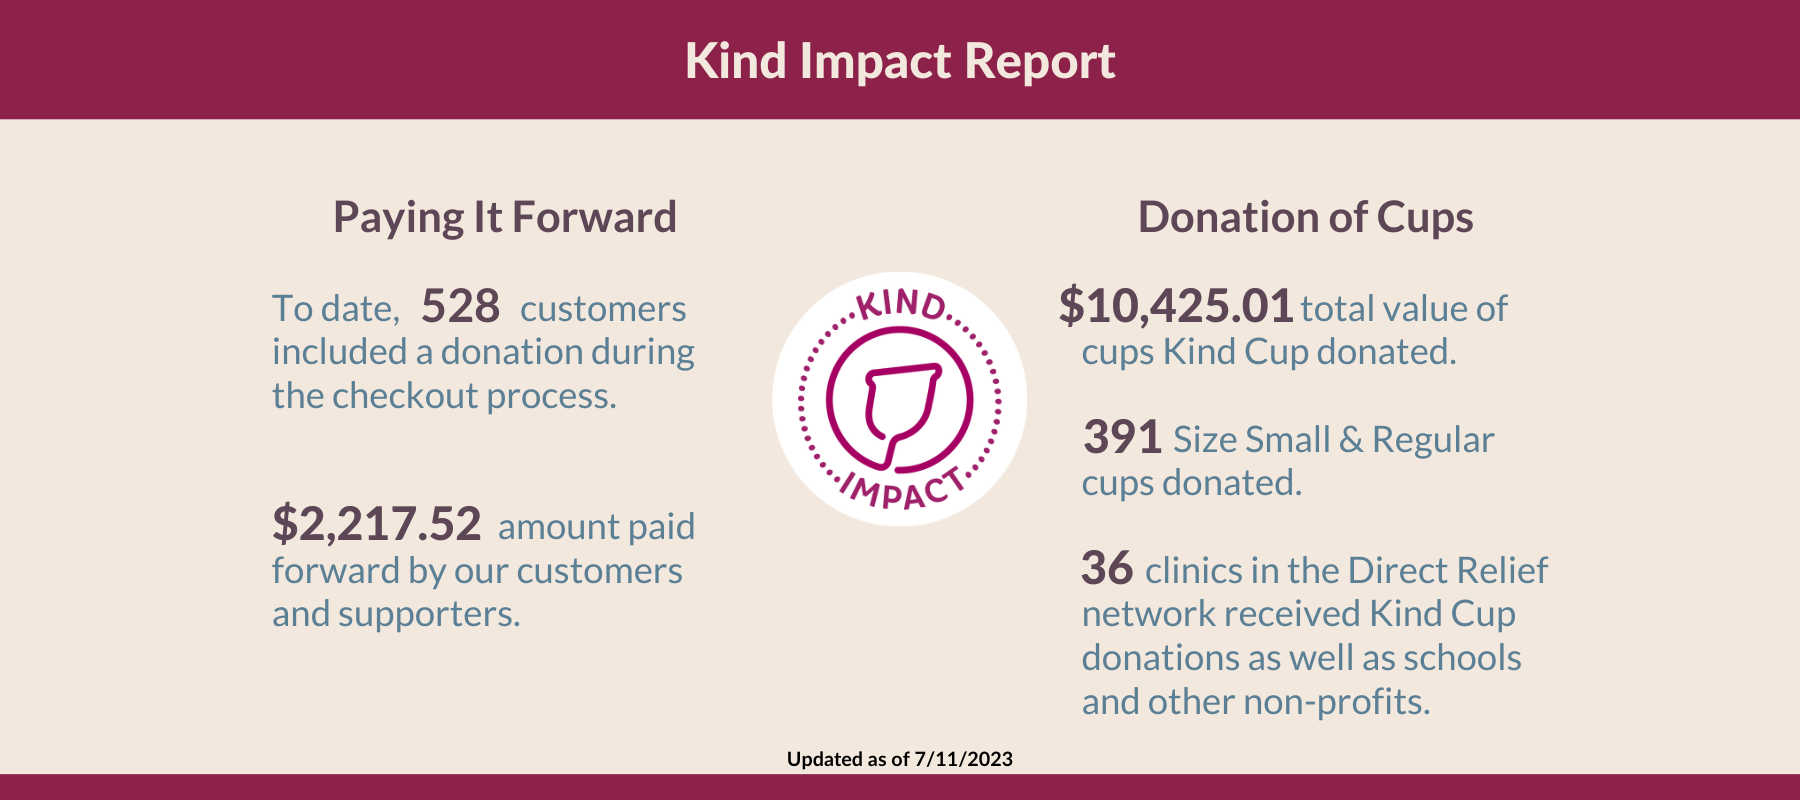 Kind Impact Report: Paying it Forward: To date, 528 customers included a donation during checkout. $10,425.01 total value of Kind Cups donated. 36 clinics in the Direct Relief network and 2 schools received Kind Cup donations.